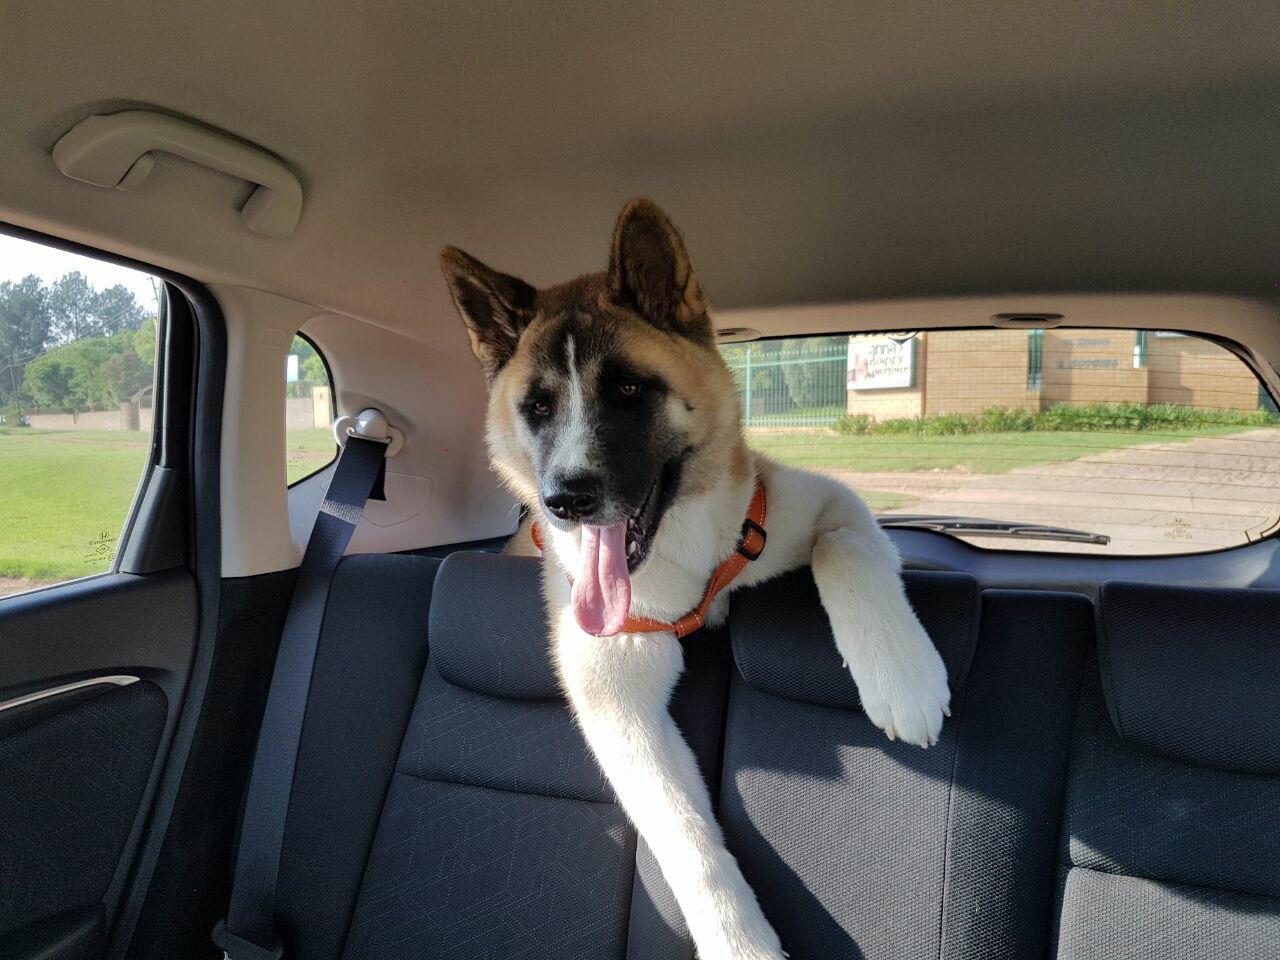 An Akita Inu in the car trunk while leaning its upper body in the backseat